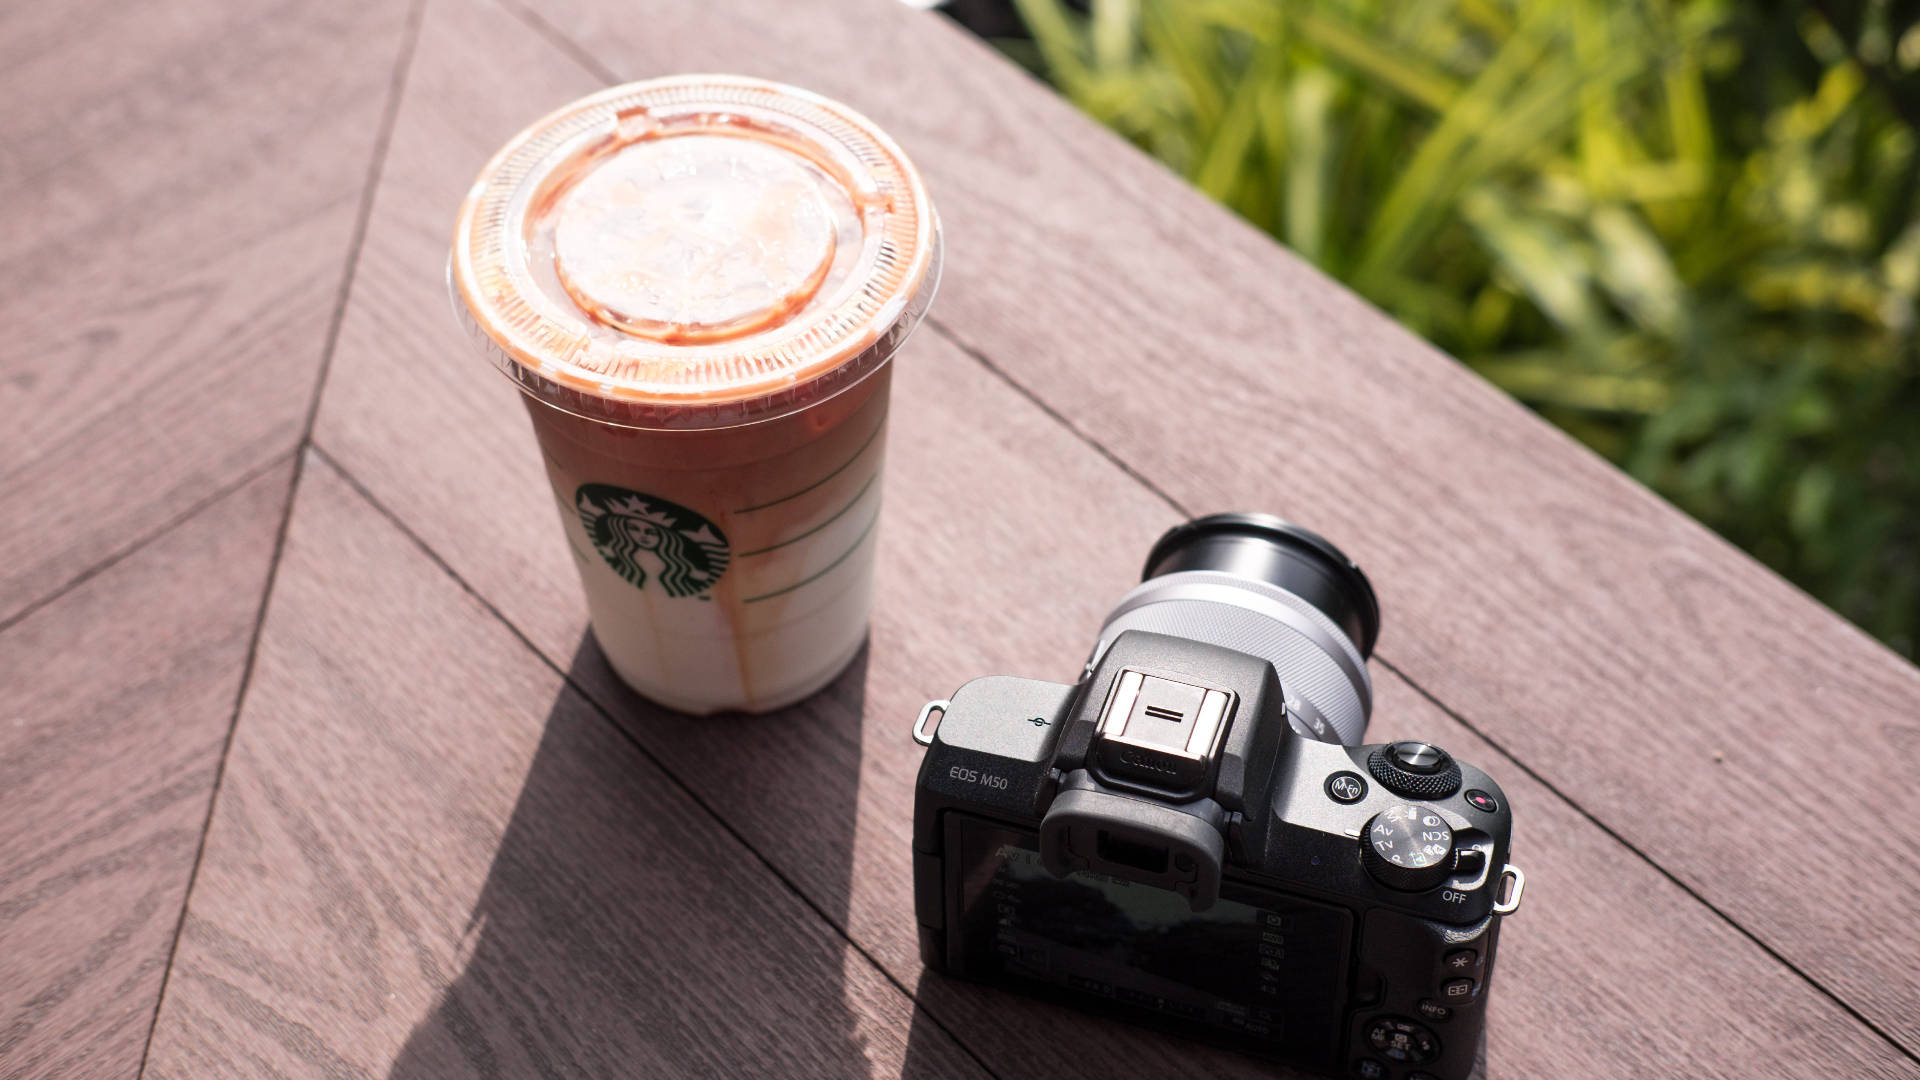 Starbucks Cup With Camera Background